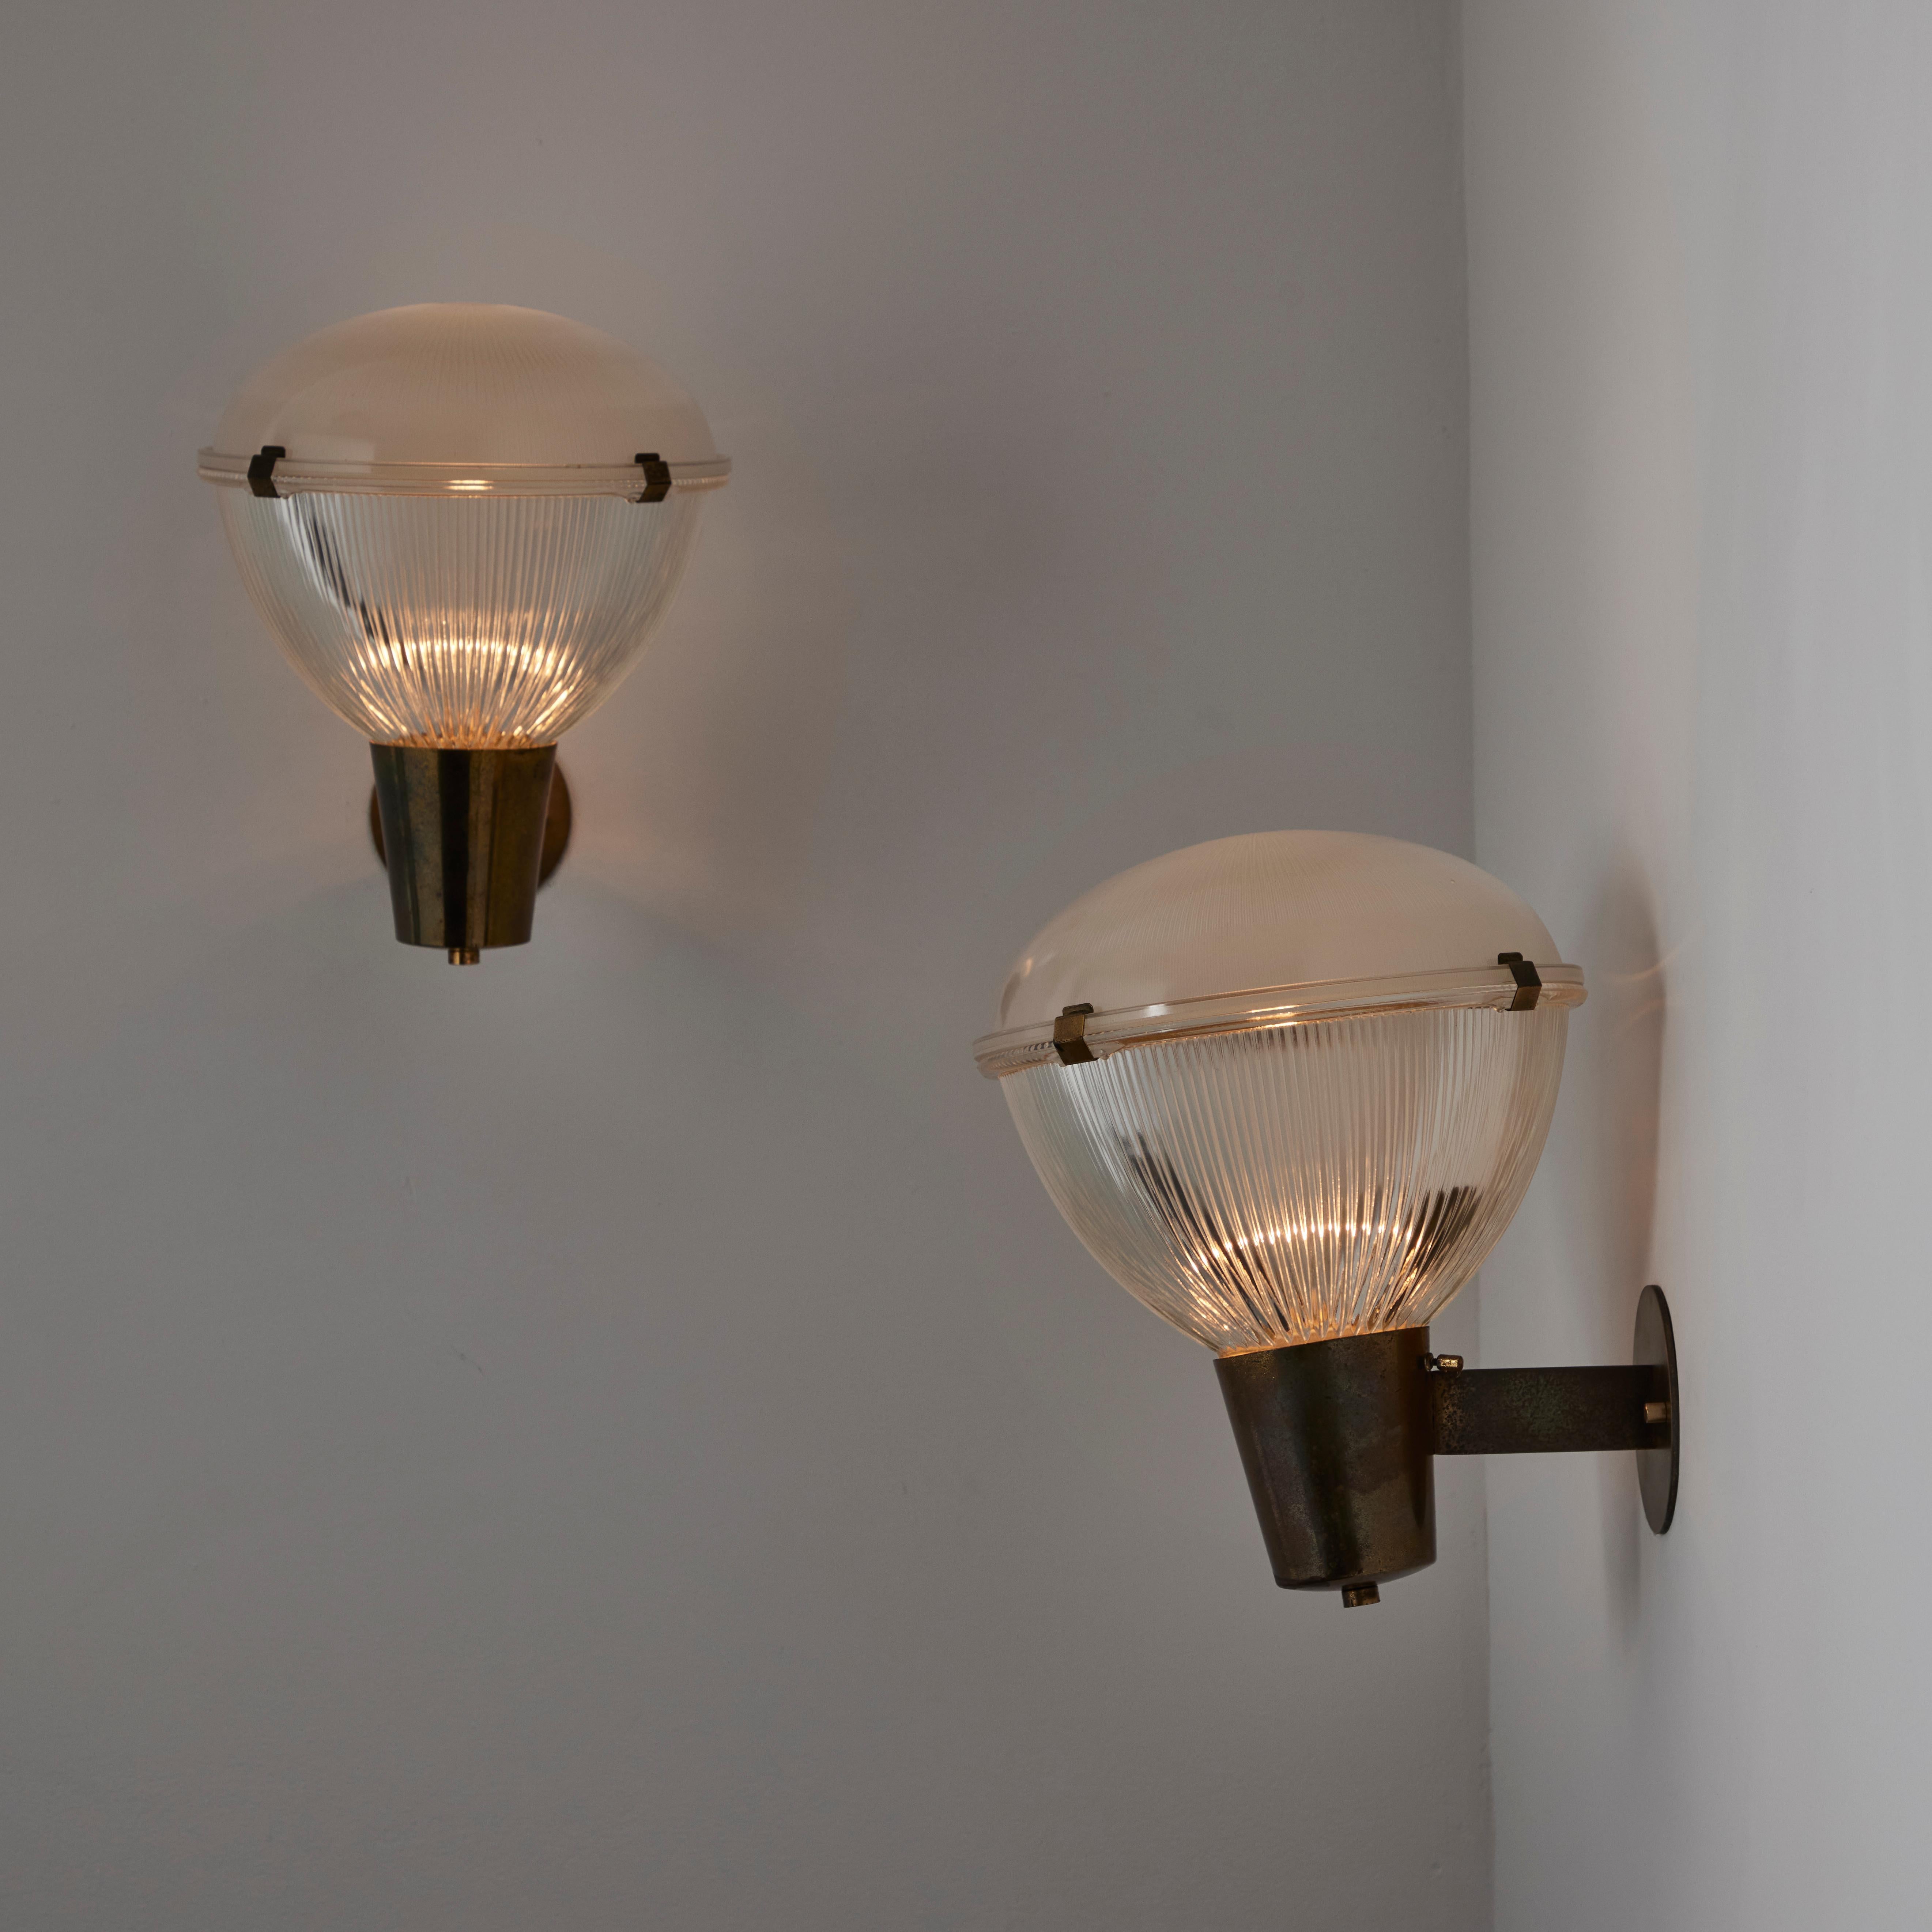 Pair of Sconces by Stilnovo. Designed and manufactured in Italy, circa the 1960s. Reeded glass bottom and top glass diffusers are clipped together and paired with aged polished patinated brass. Each light holds a single E14 socket type, adapted for